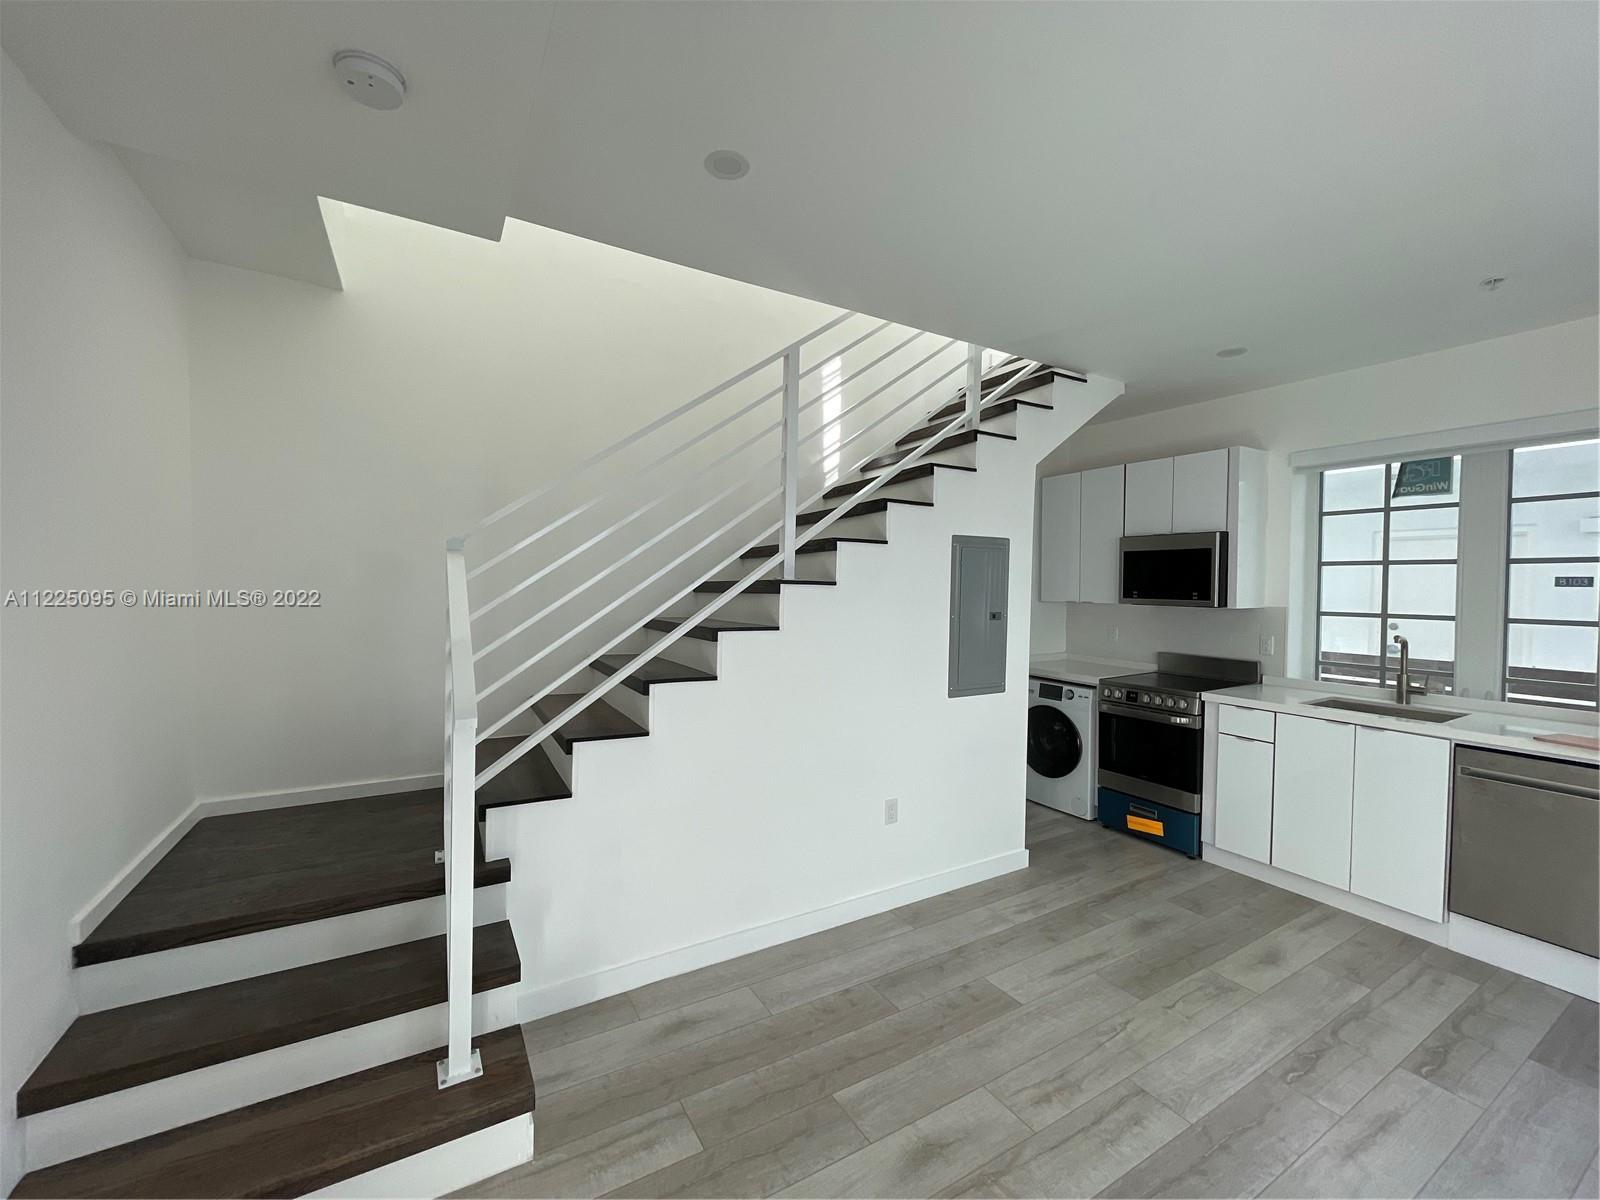 Chic and modern brand new 2 story home in a completely renovated Art Deco condo conversion. This lov